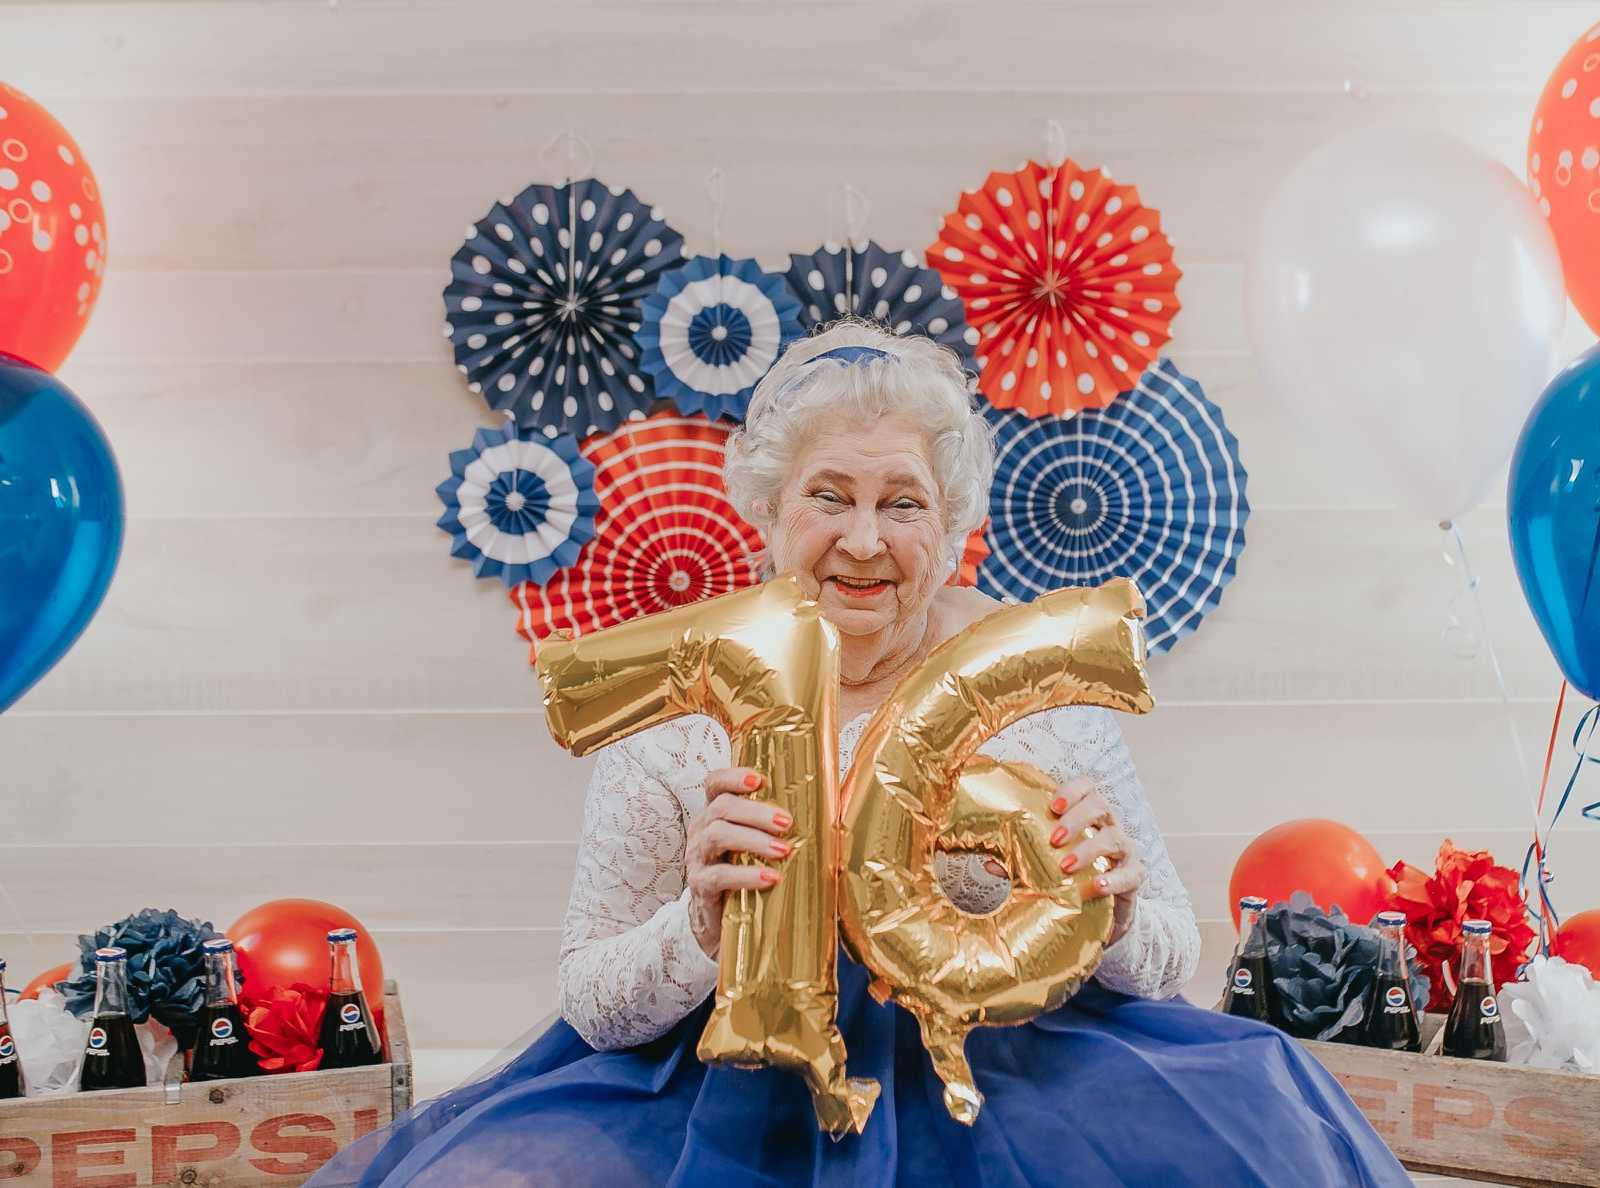 elderly woman holding up gold balloons of number 76 next to crates of pepsi and red white and blue decorations